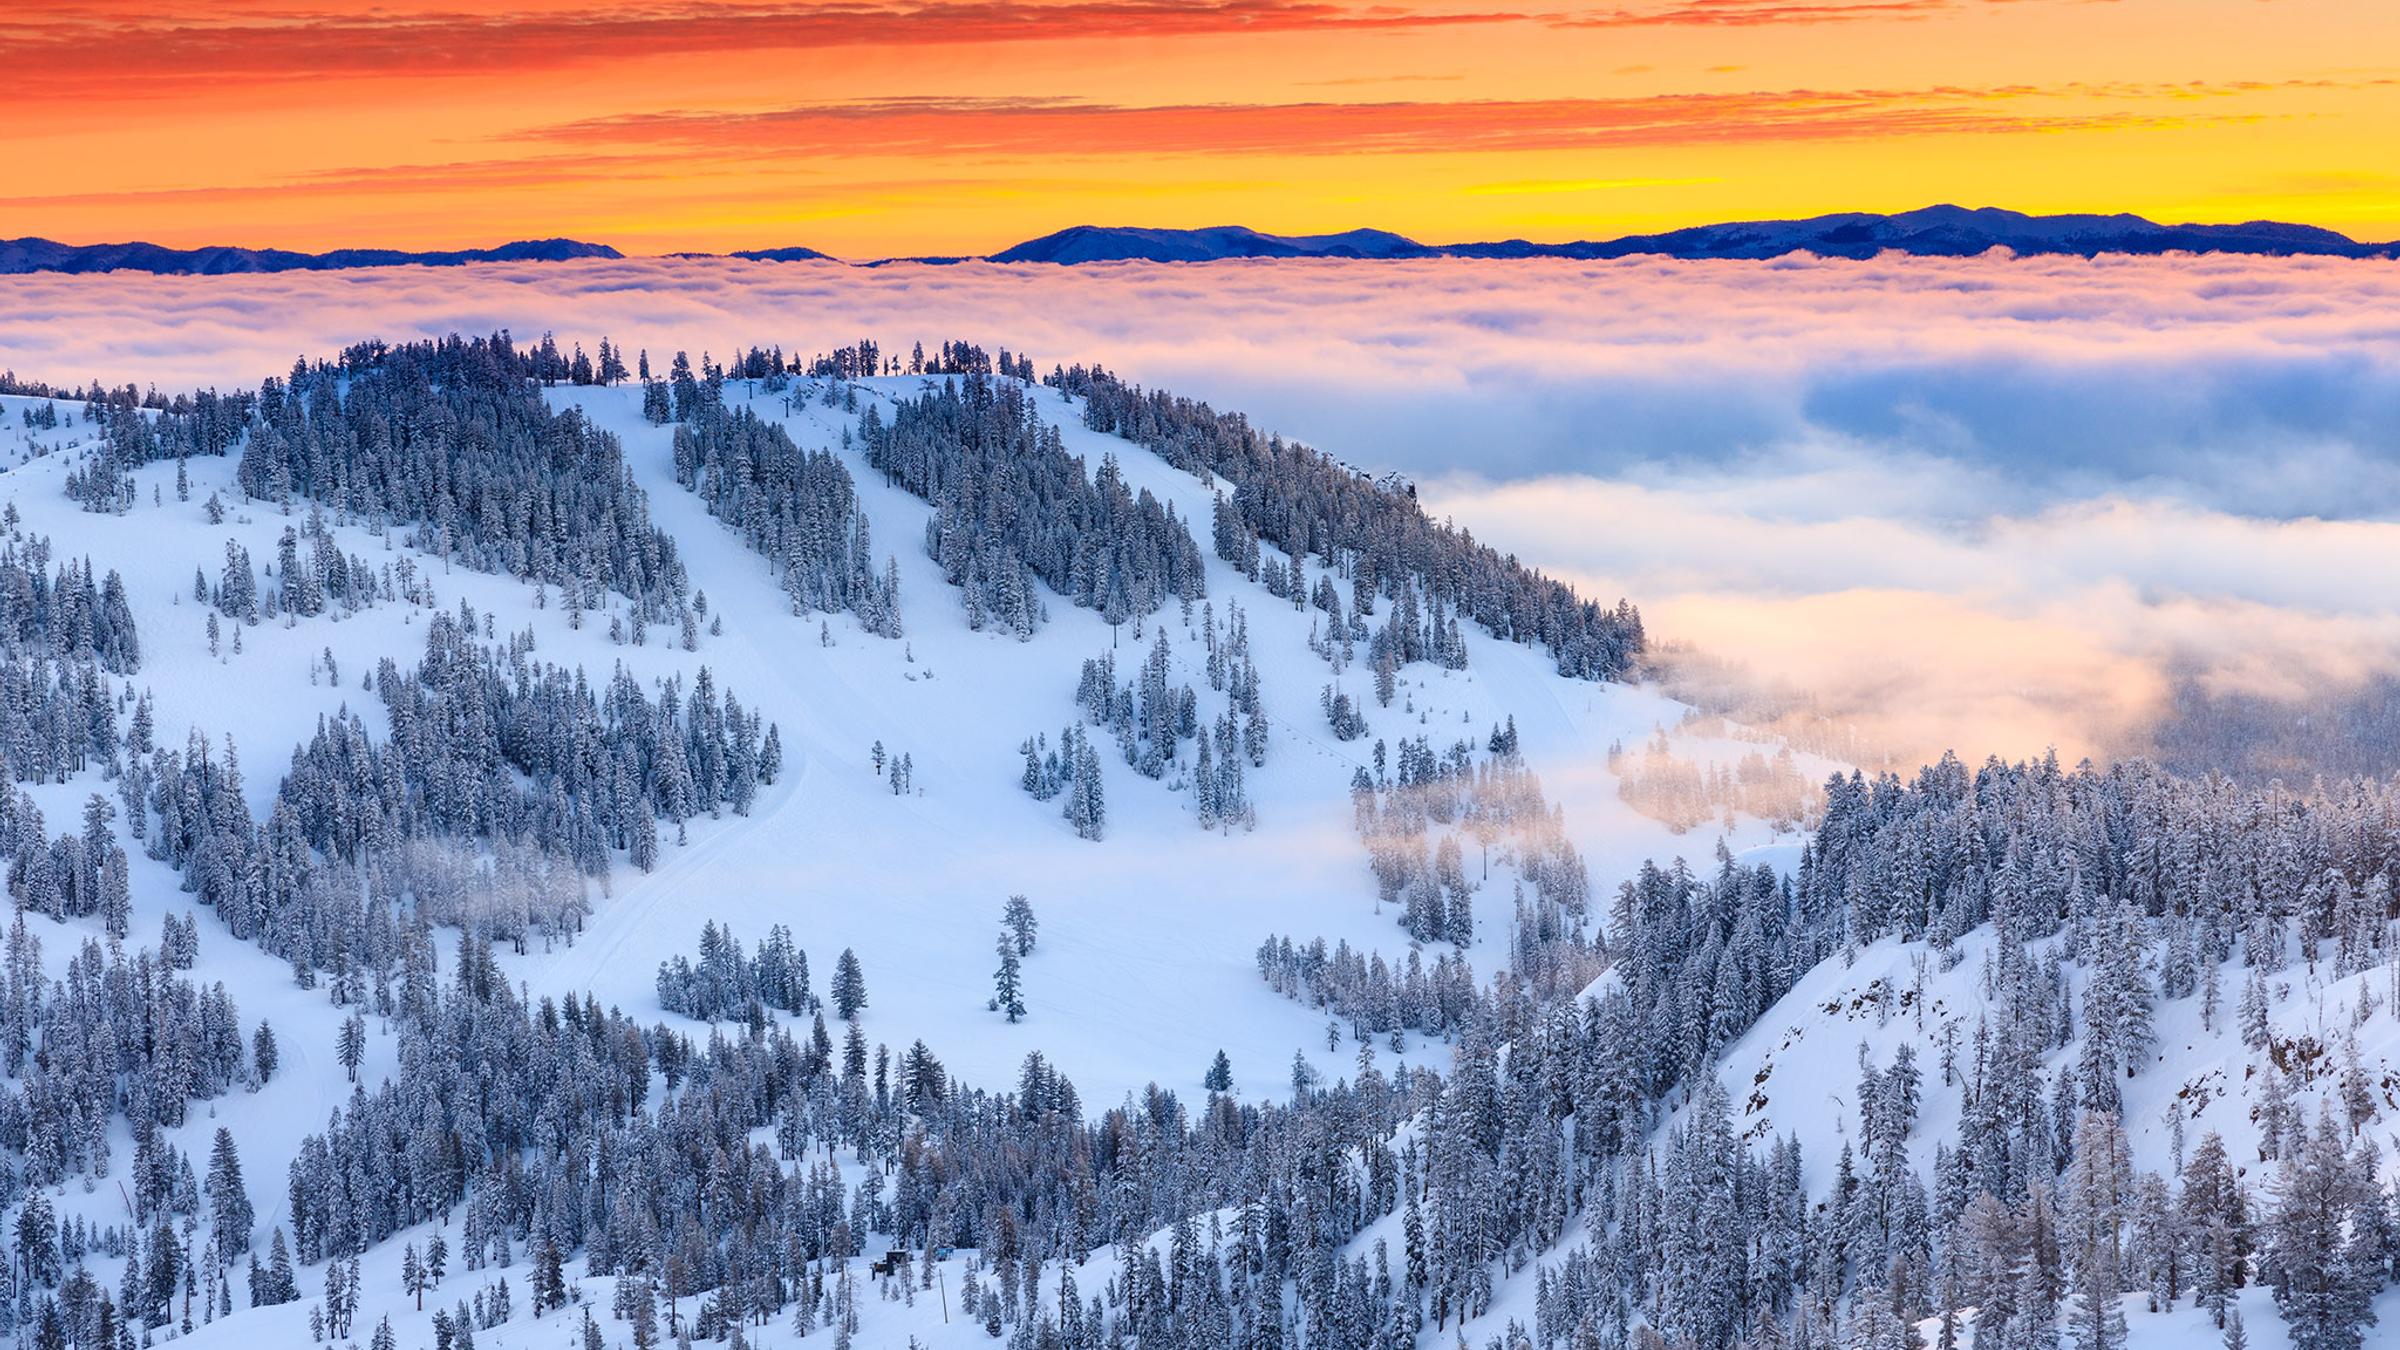 Scenics sunrise at Alpine Meadows above the clouds